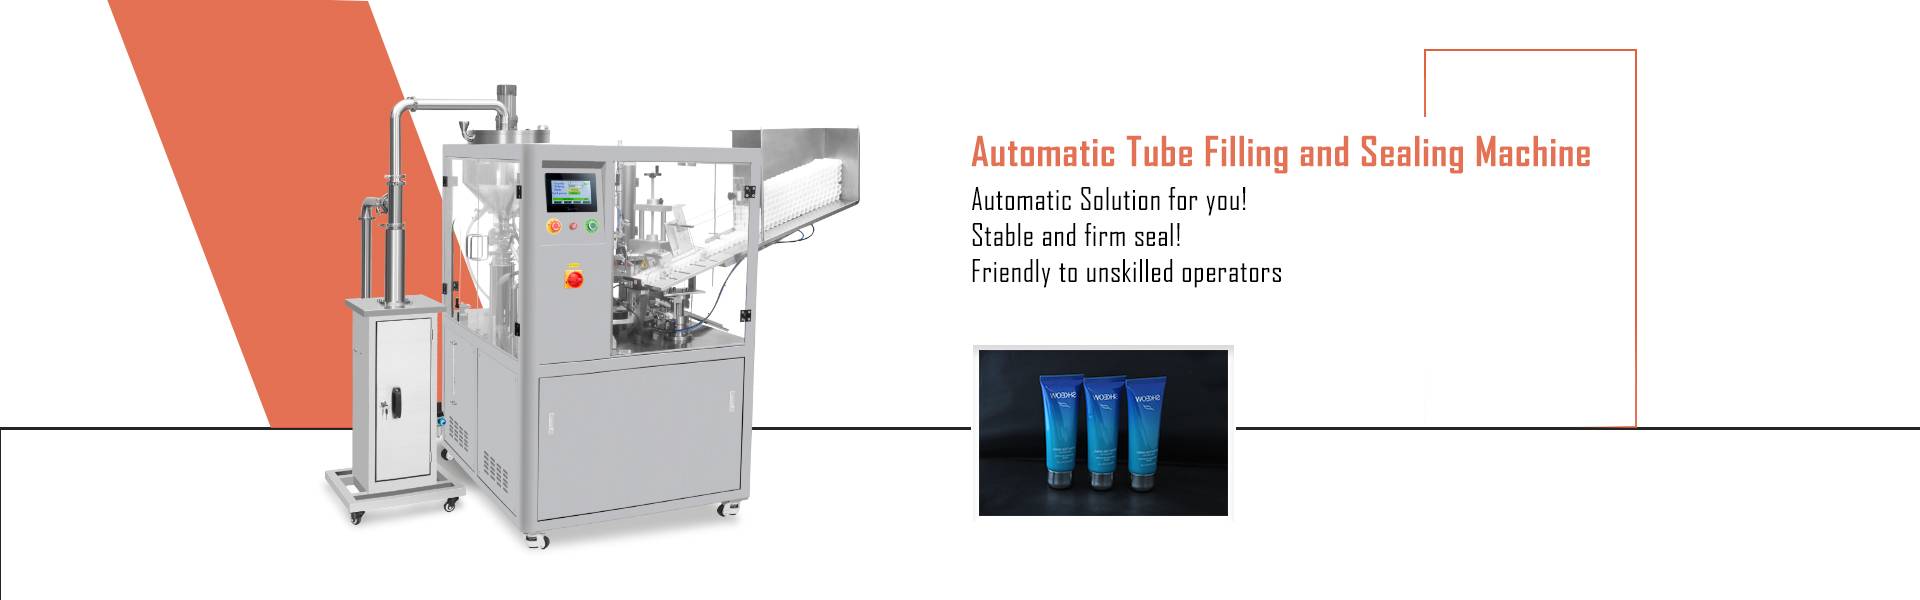 automatic-ultrasonic-tube-filler-and-sealer-hx-009-product